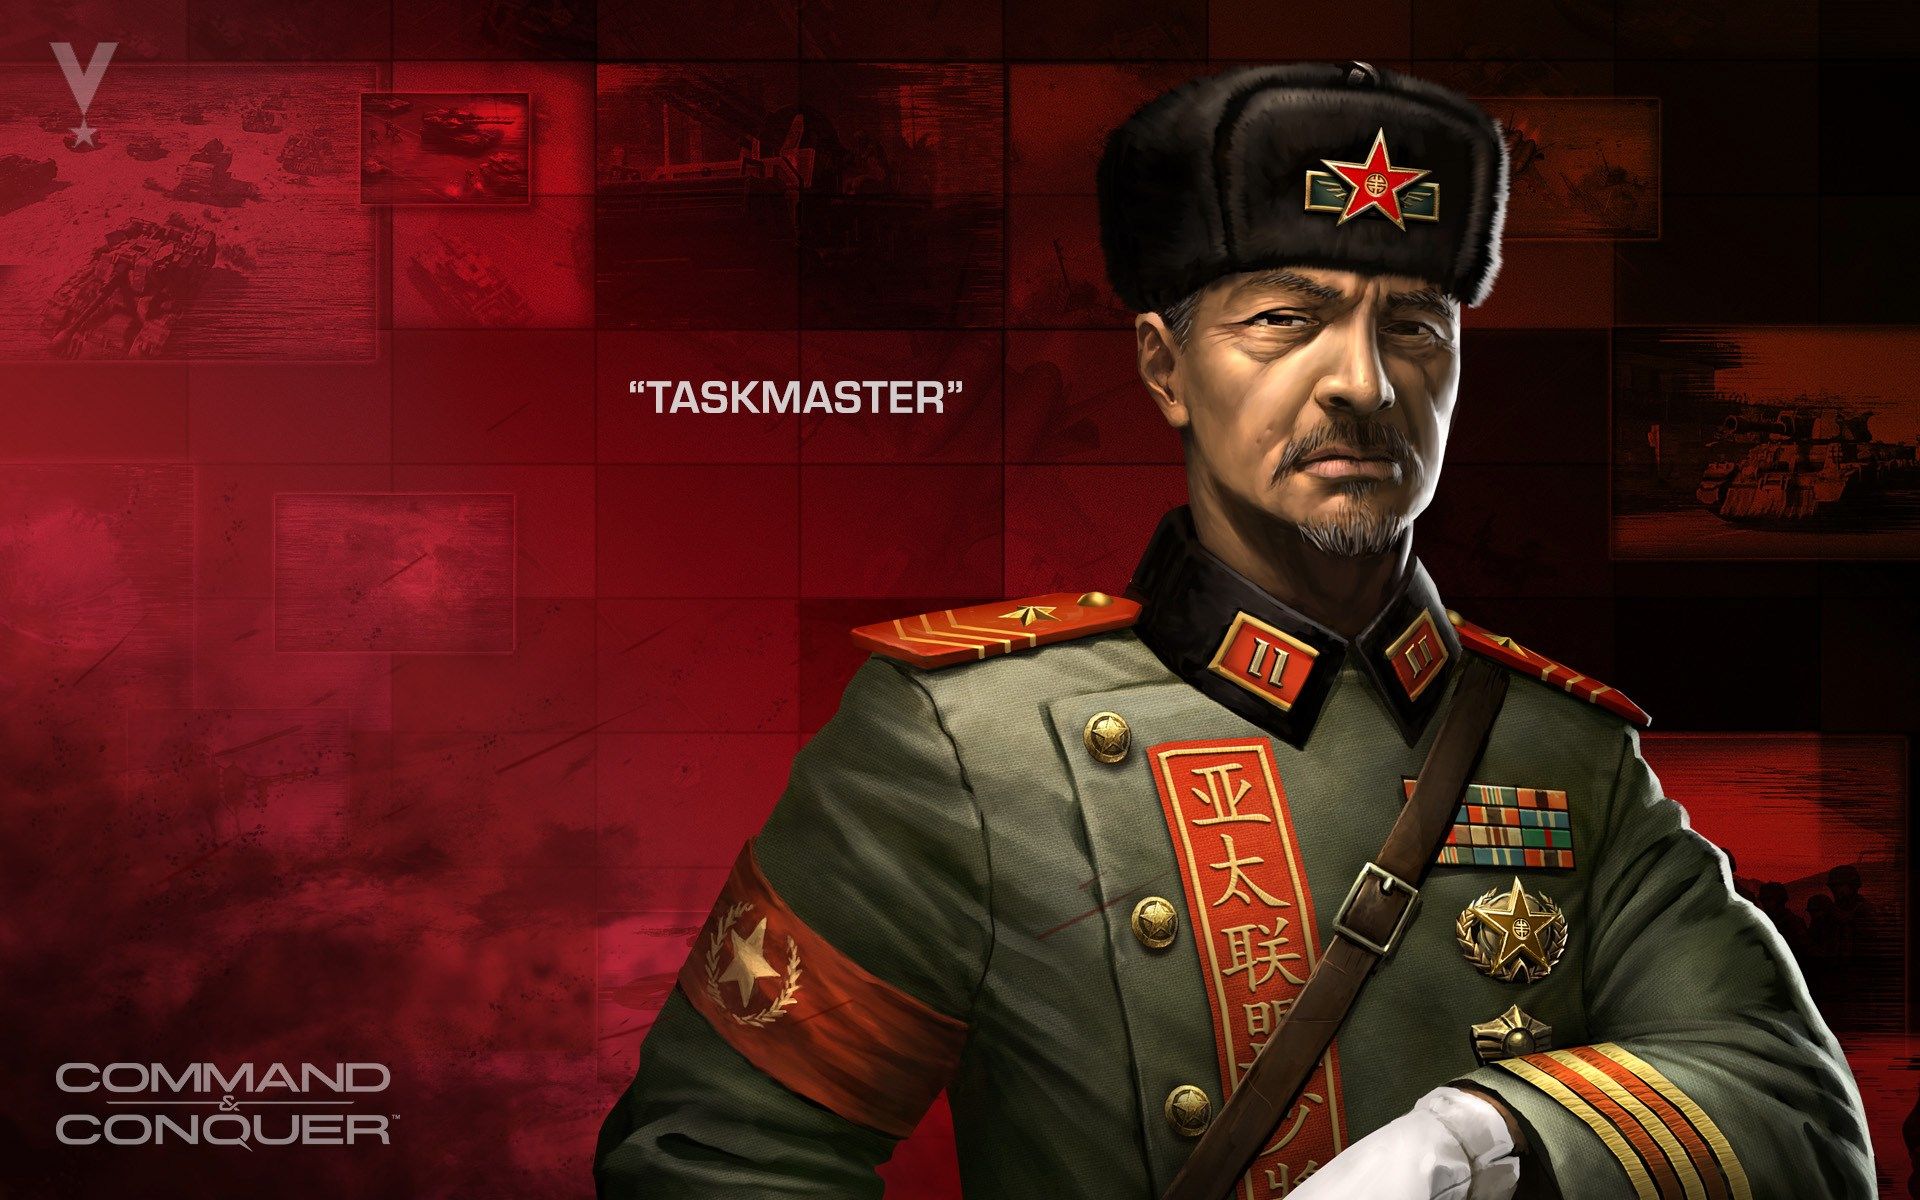 Command & Conquer: Generals 2 wallpaper widescreen retina imac & Conquer: Generals 2 category. Command and conquer, Conquer, Soviet red army